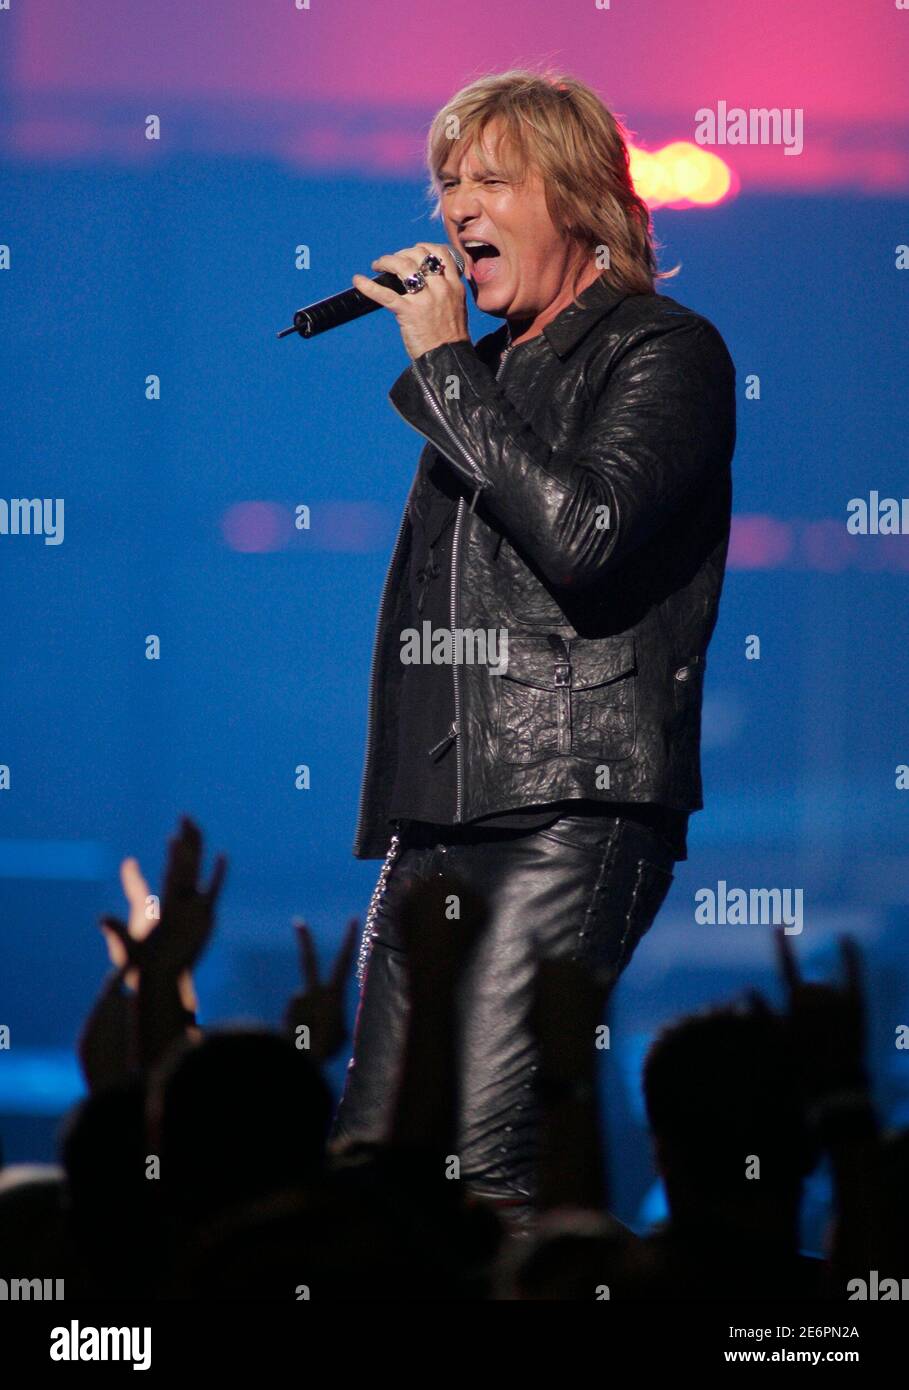 Def Leppard singer Joe Elliott performs during the VH1 Rock Honors concert at the Mandalay Bay Events Center in Las Vegas, Nevada May 25, 2006. The show, honoring the legends of hard rock, will be broadcast May 31 on the VH1 network. [The tribute show celebrates the music and influence of Queen,  Def Leppard, Judas Priest and KISS.] Stock Photo